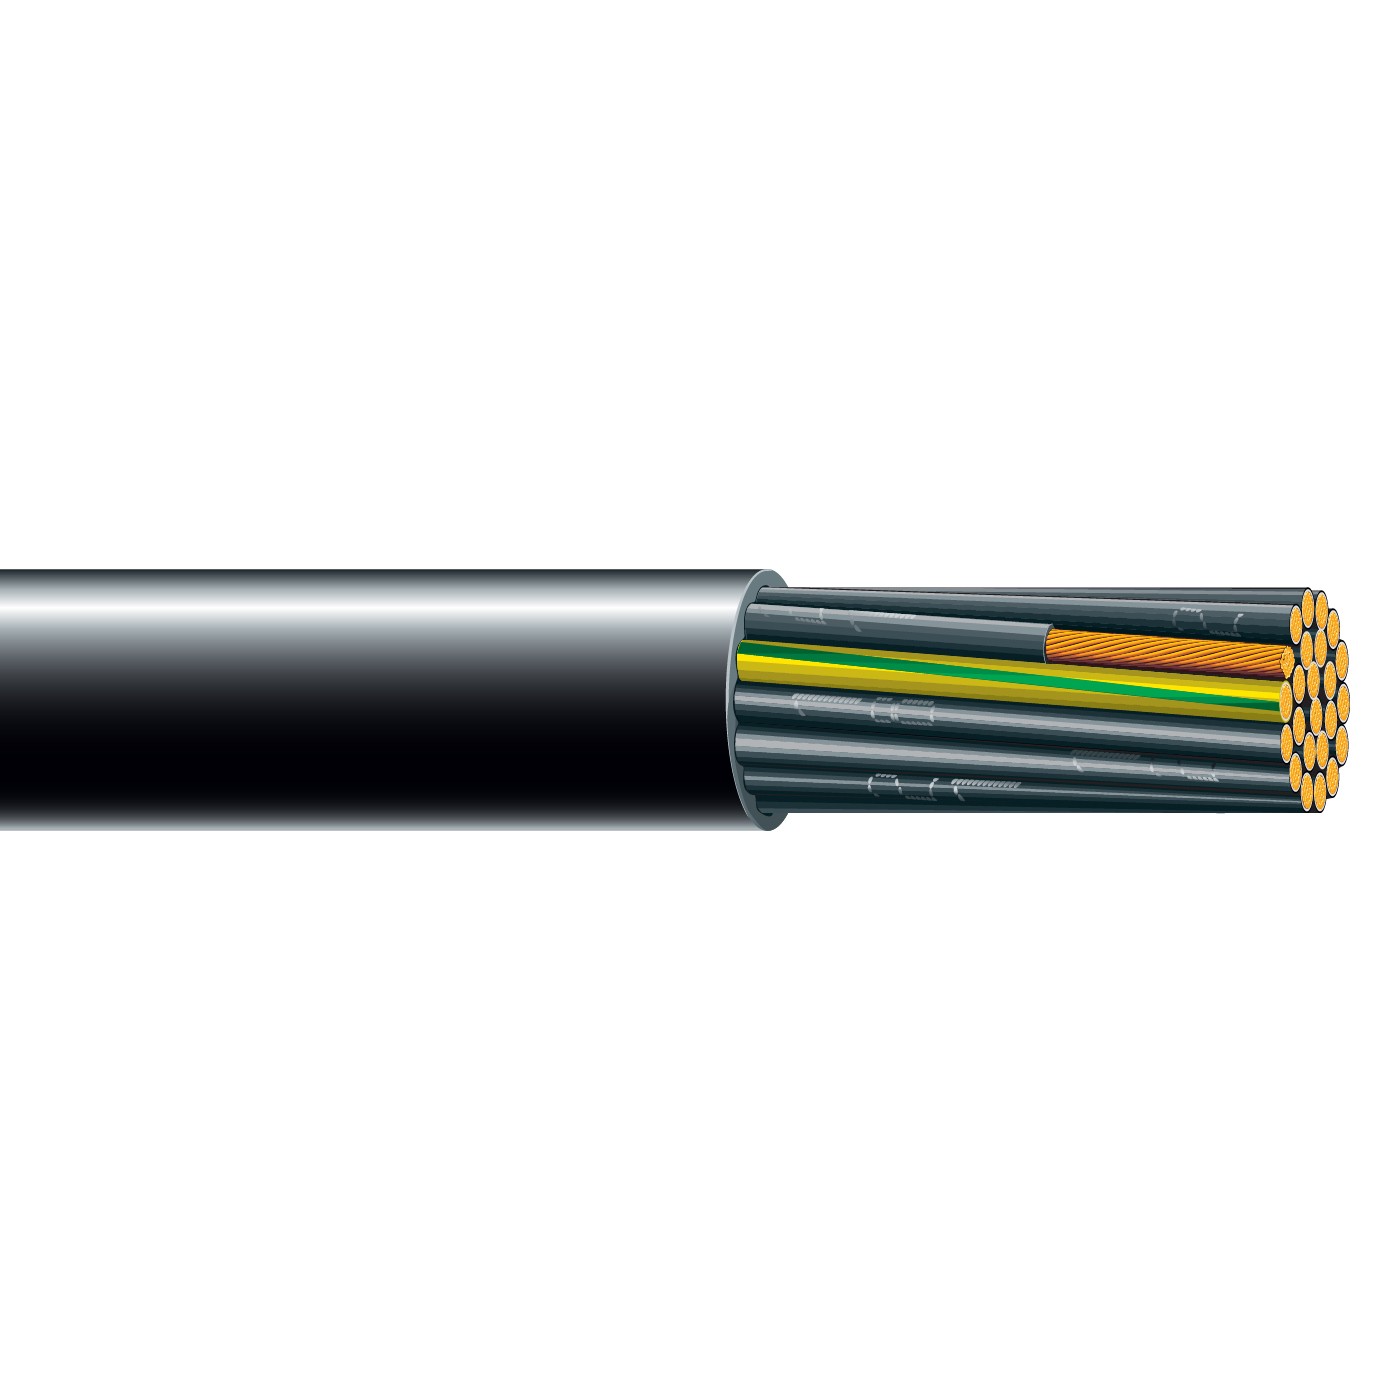 YSLY 600/1000 PVC flexible control cable